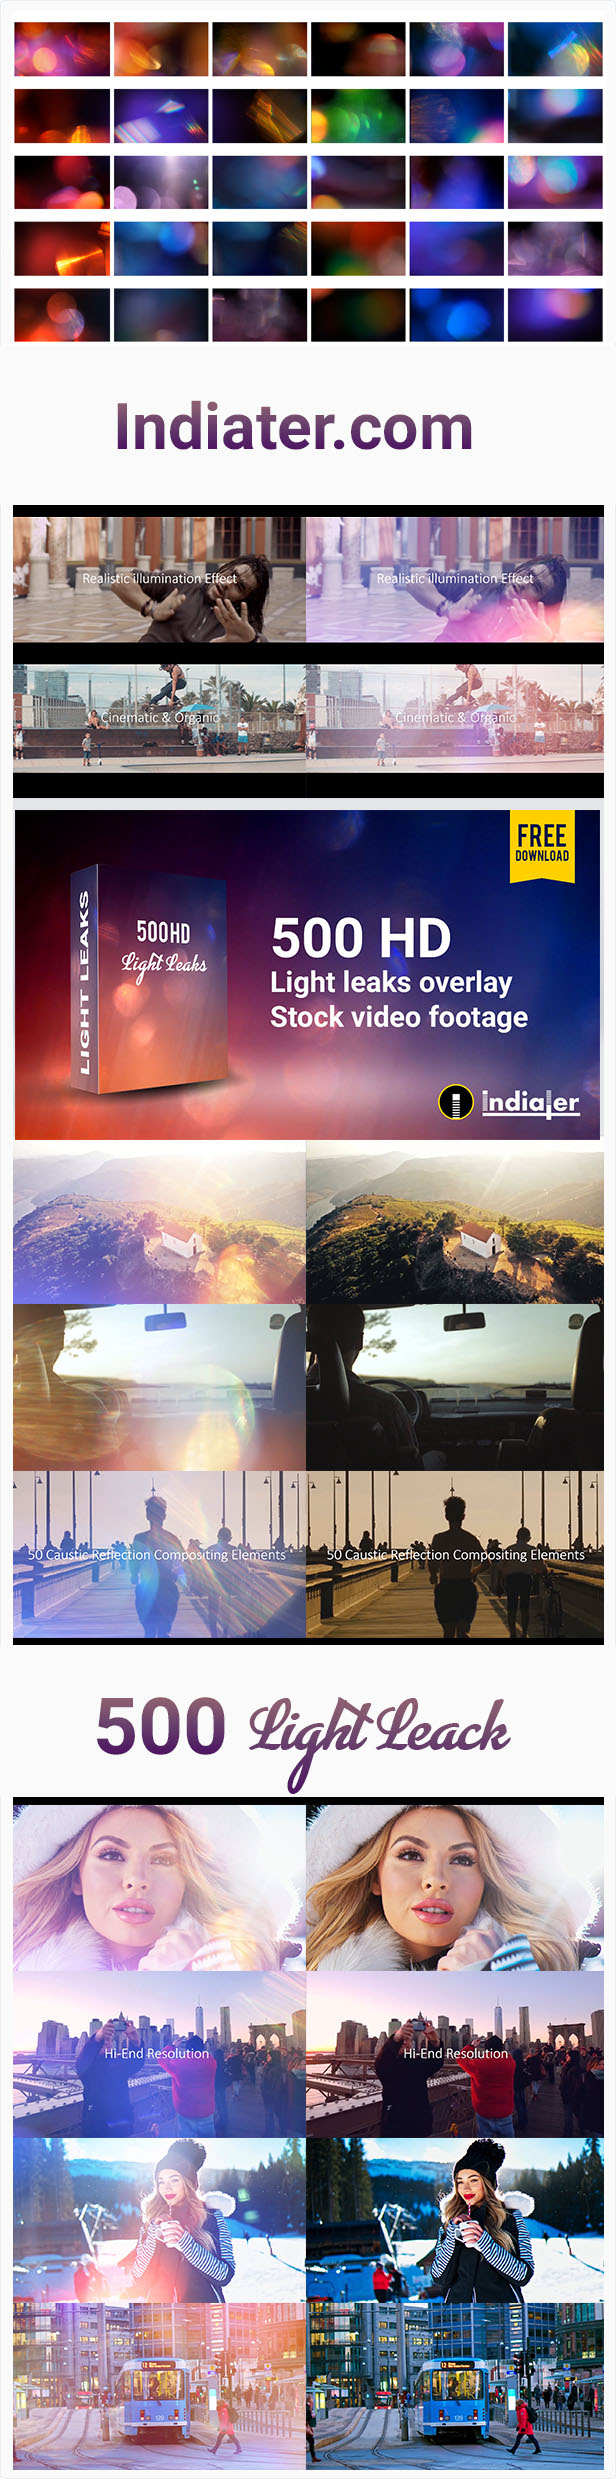 500-hd-light-leaks-overlay-stock-video-footage-free-download